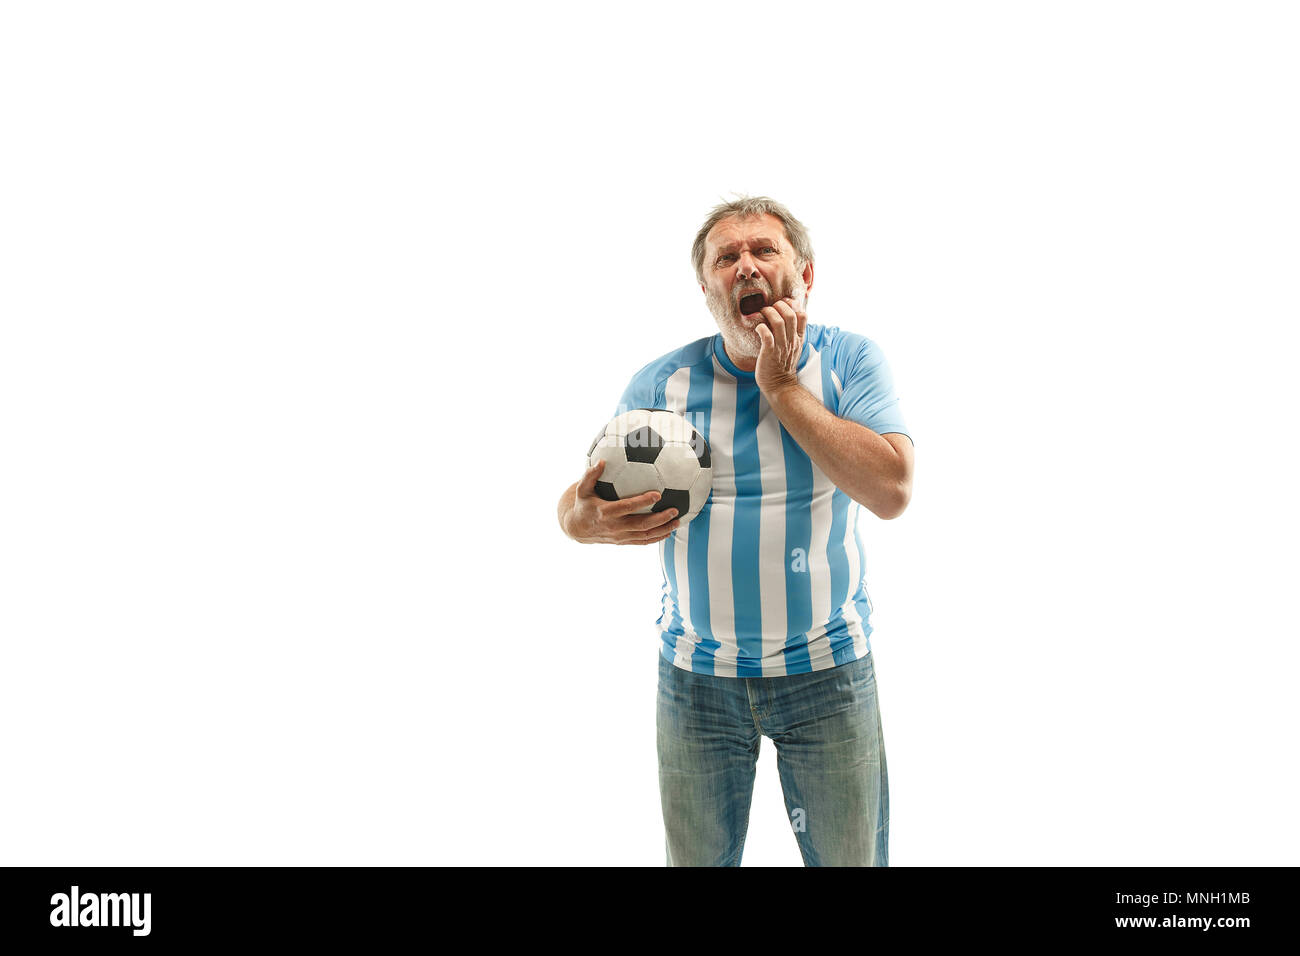 The unhappy and sad Argentinean fan on white background Stock Photo